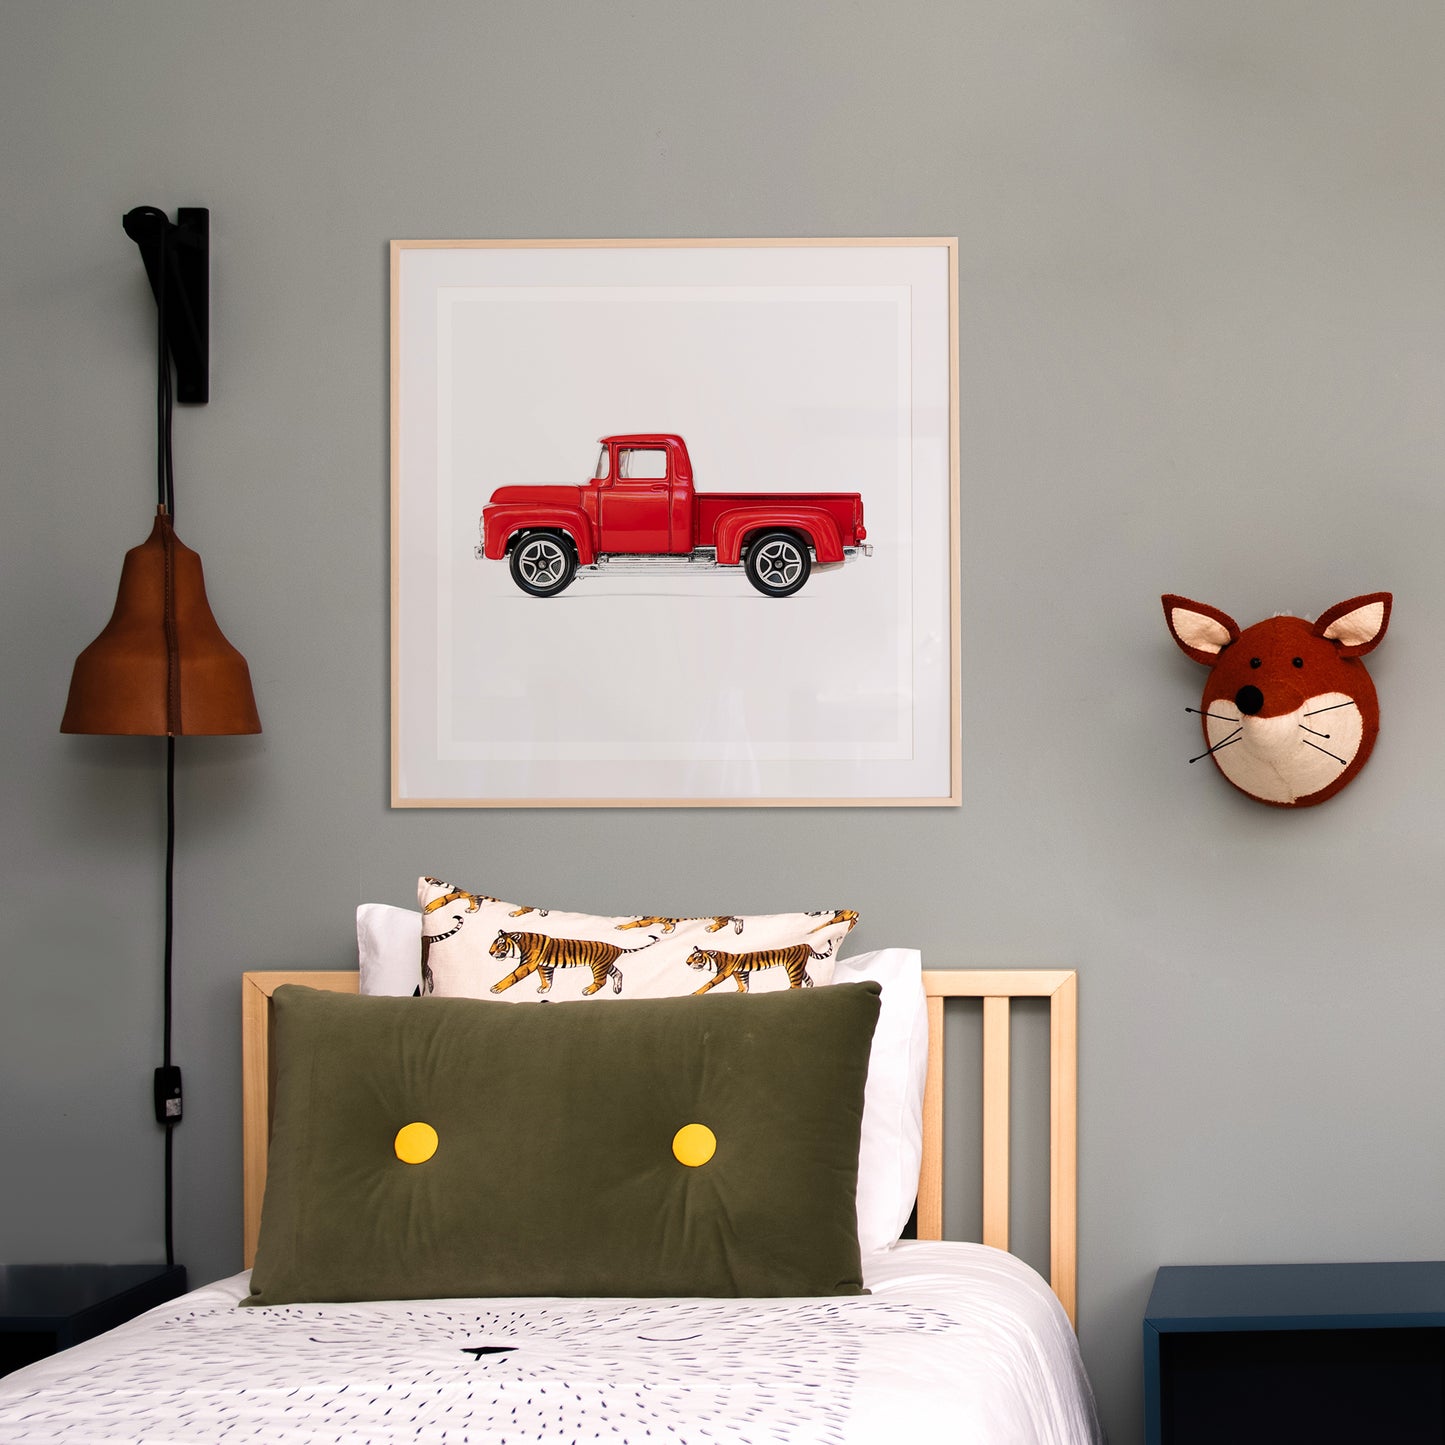 Old Red Pickup Truck nursery wall art for boys' room